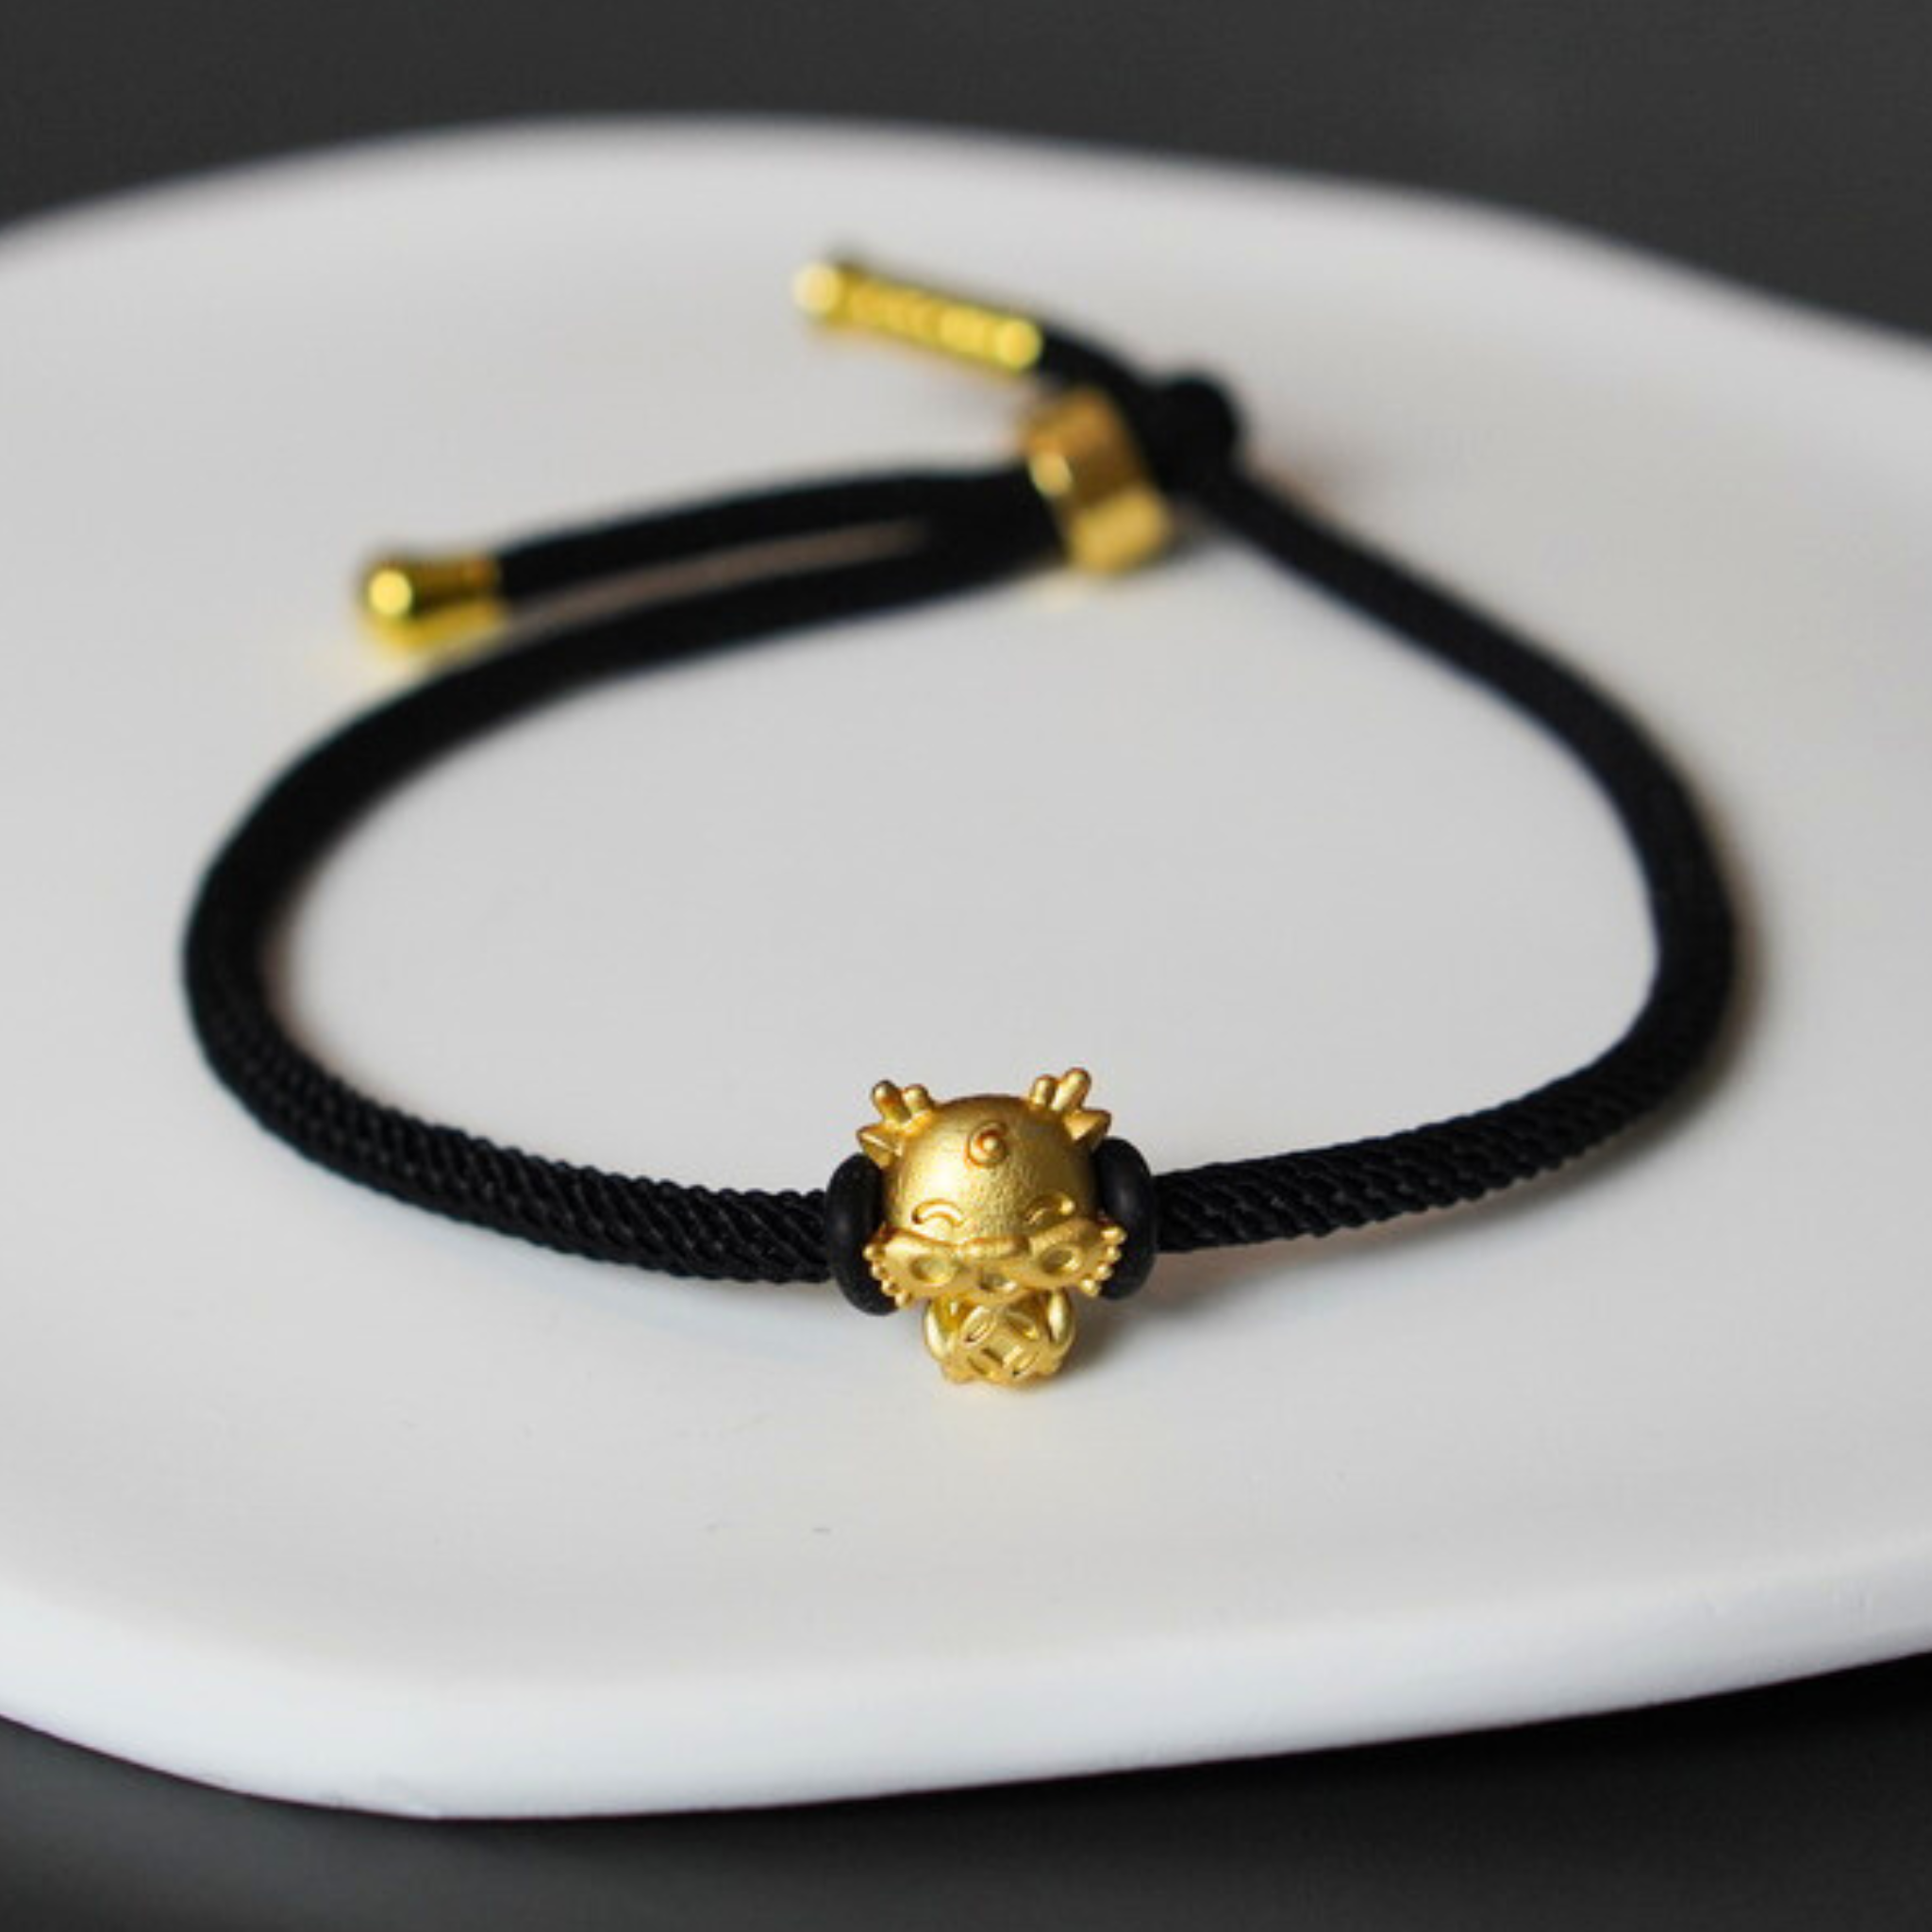 Chinese Good Luck Bracelet: The Meaning Behind These Charms